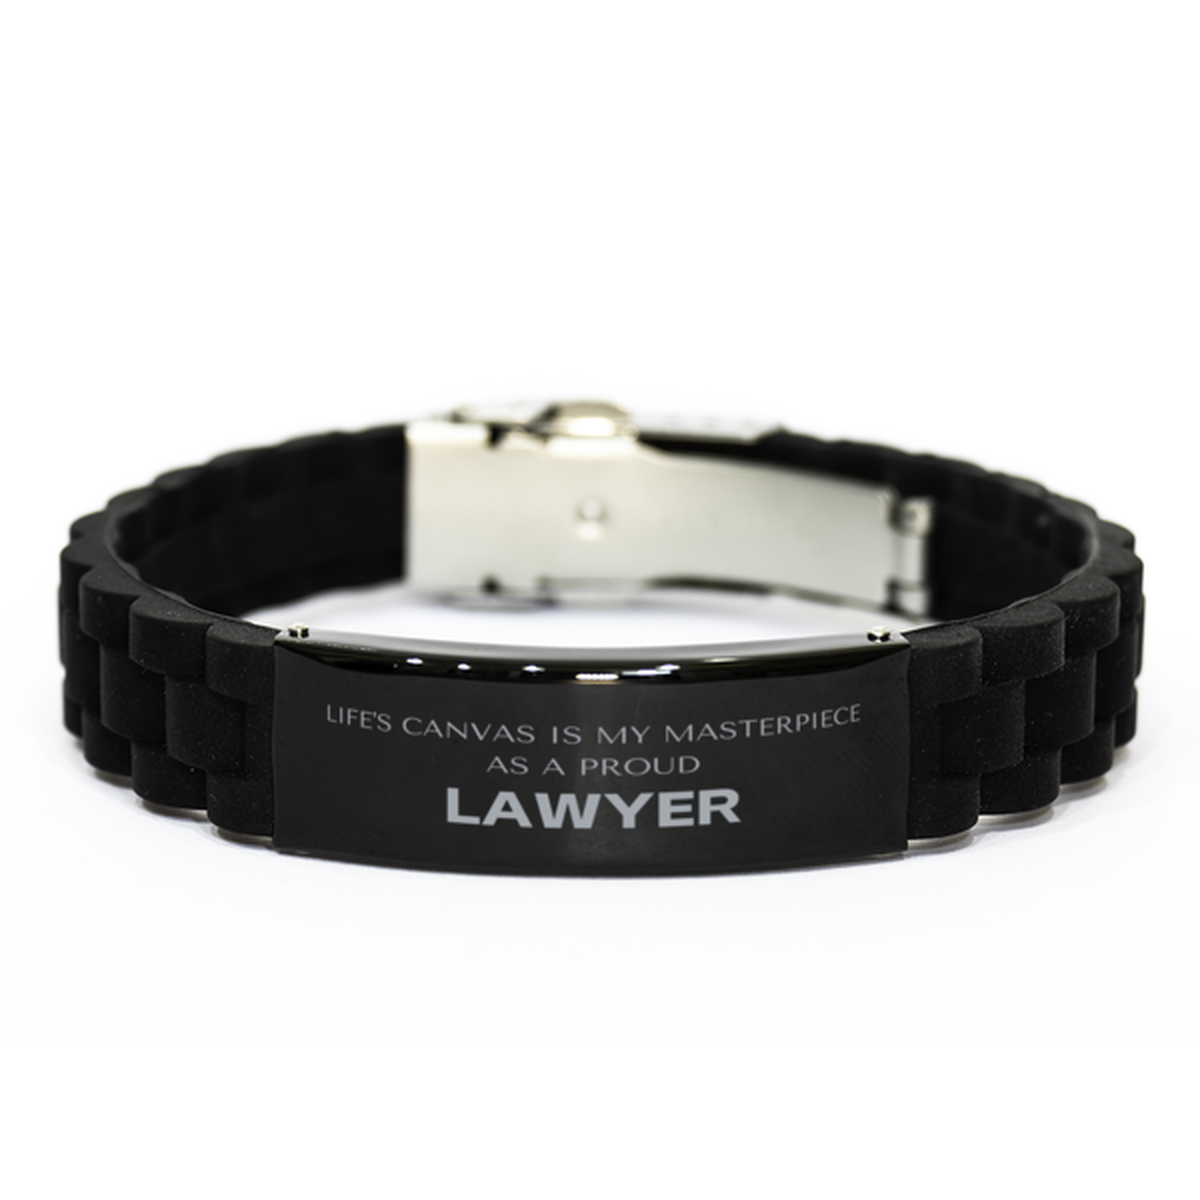 Proud Lawyer Gifts, Life's canvas is my masterpiece, Epic Birthday Christmas Unique Black Glidelock Clasp Bracelet For Lawyer, Coworkers, Men, Women, Friends